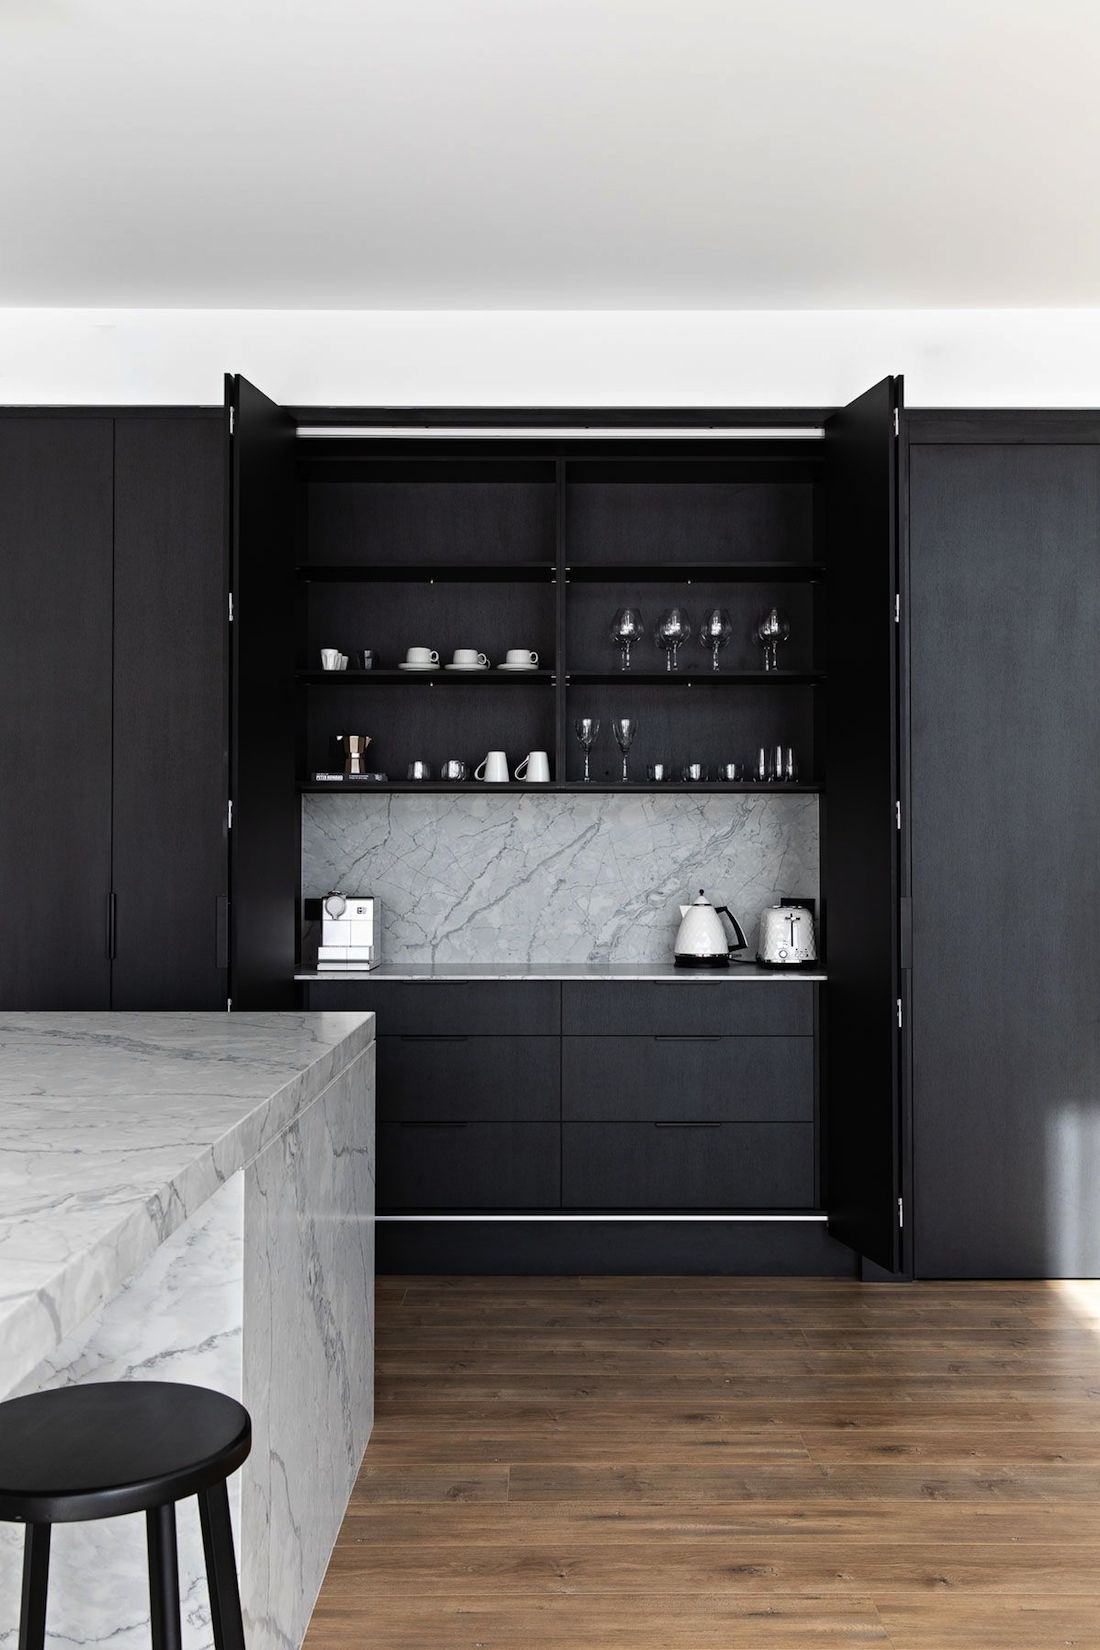 How to keep kitchen tidy in black kitchen